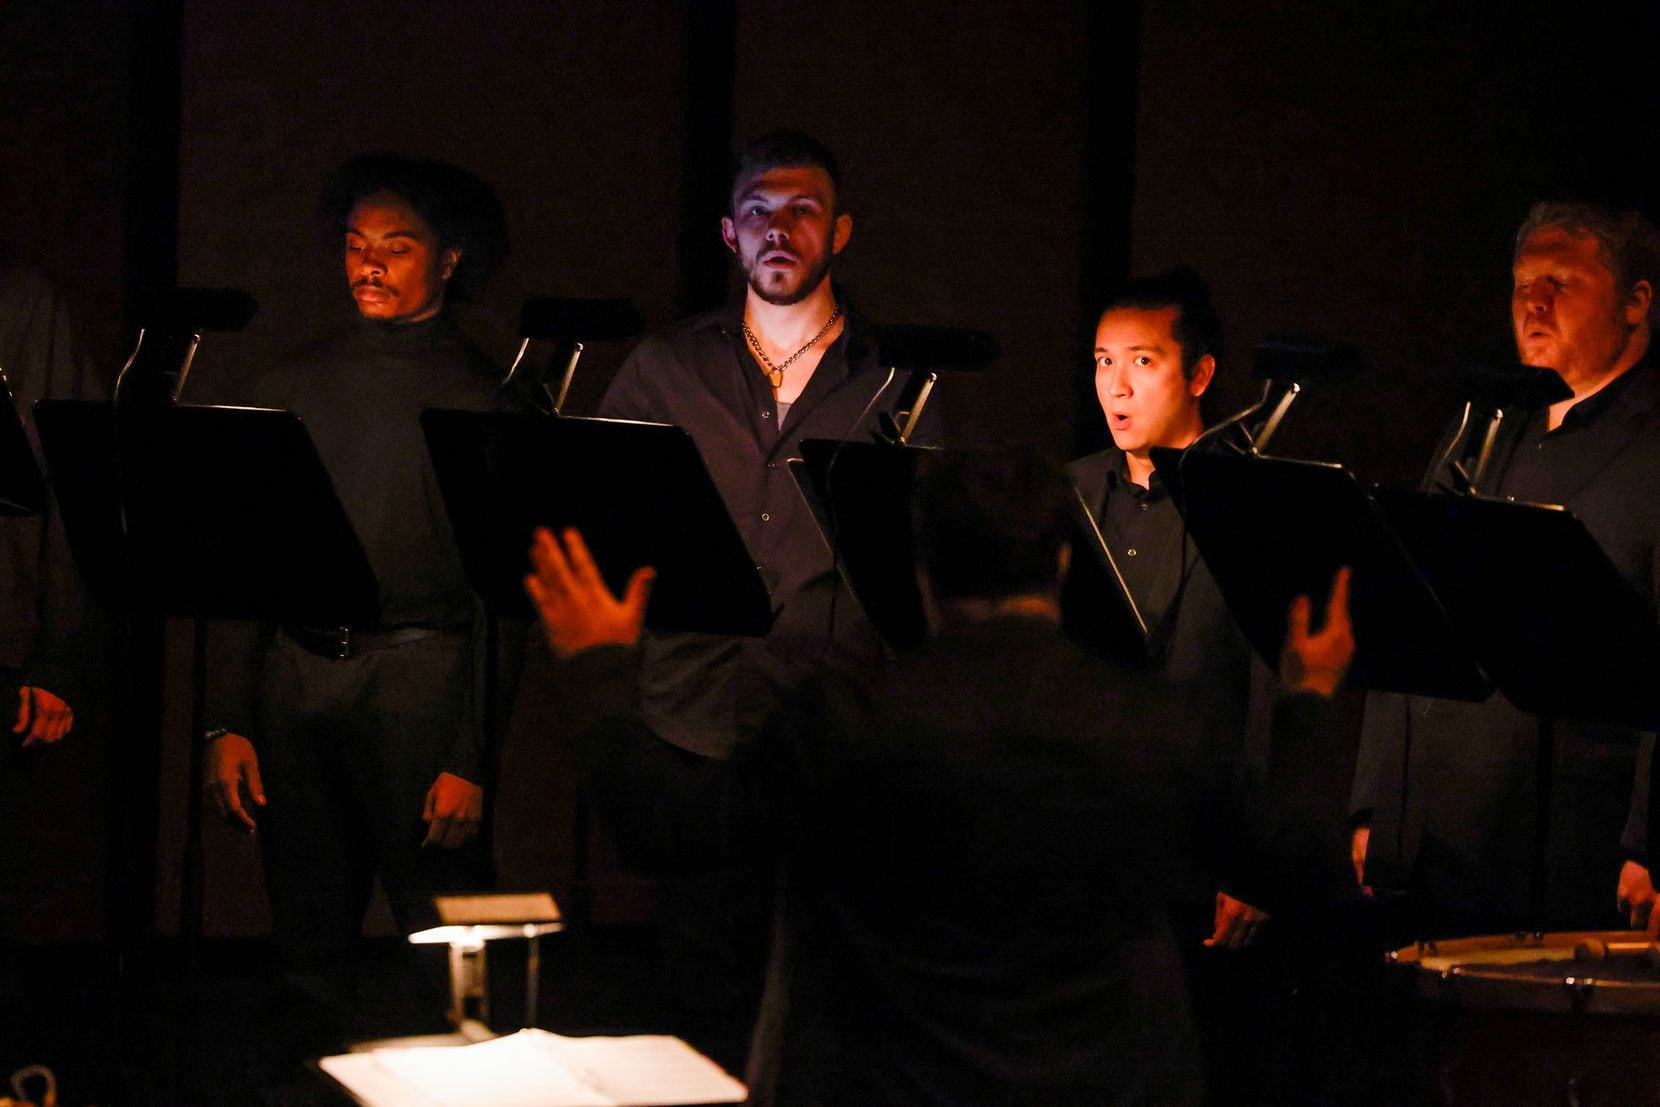 Artistic director Sam Brukhman leads the Verdigris Ensemble in concert at the Moody...